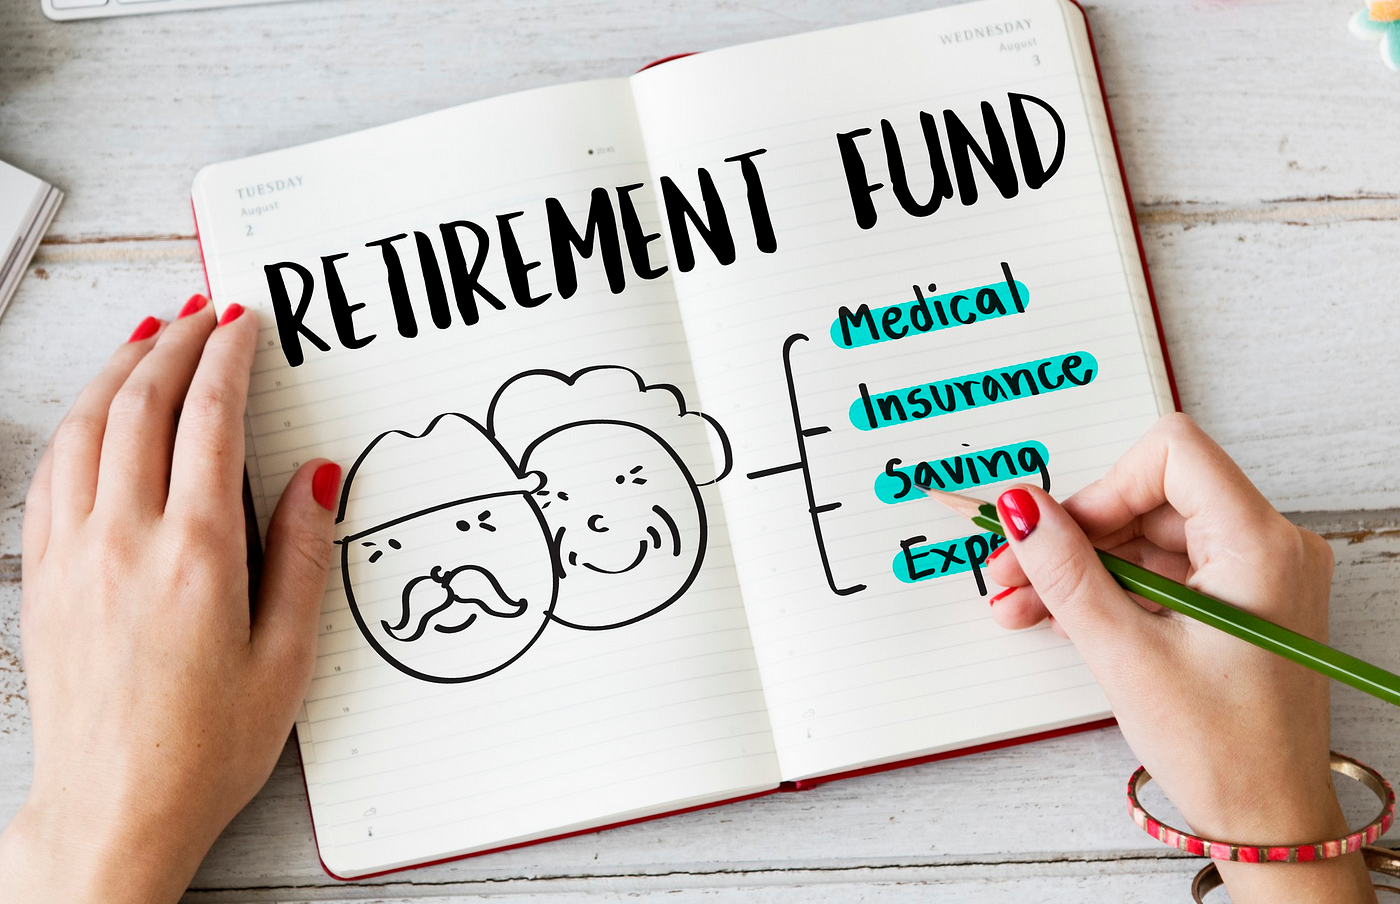 Future Retirement Planning Tips for a Secure Future